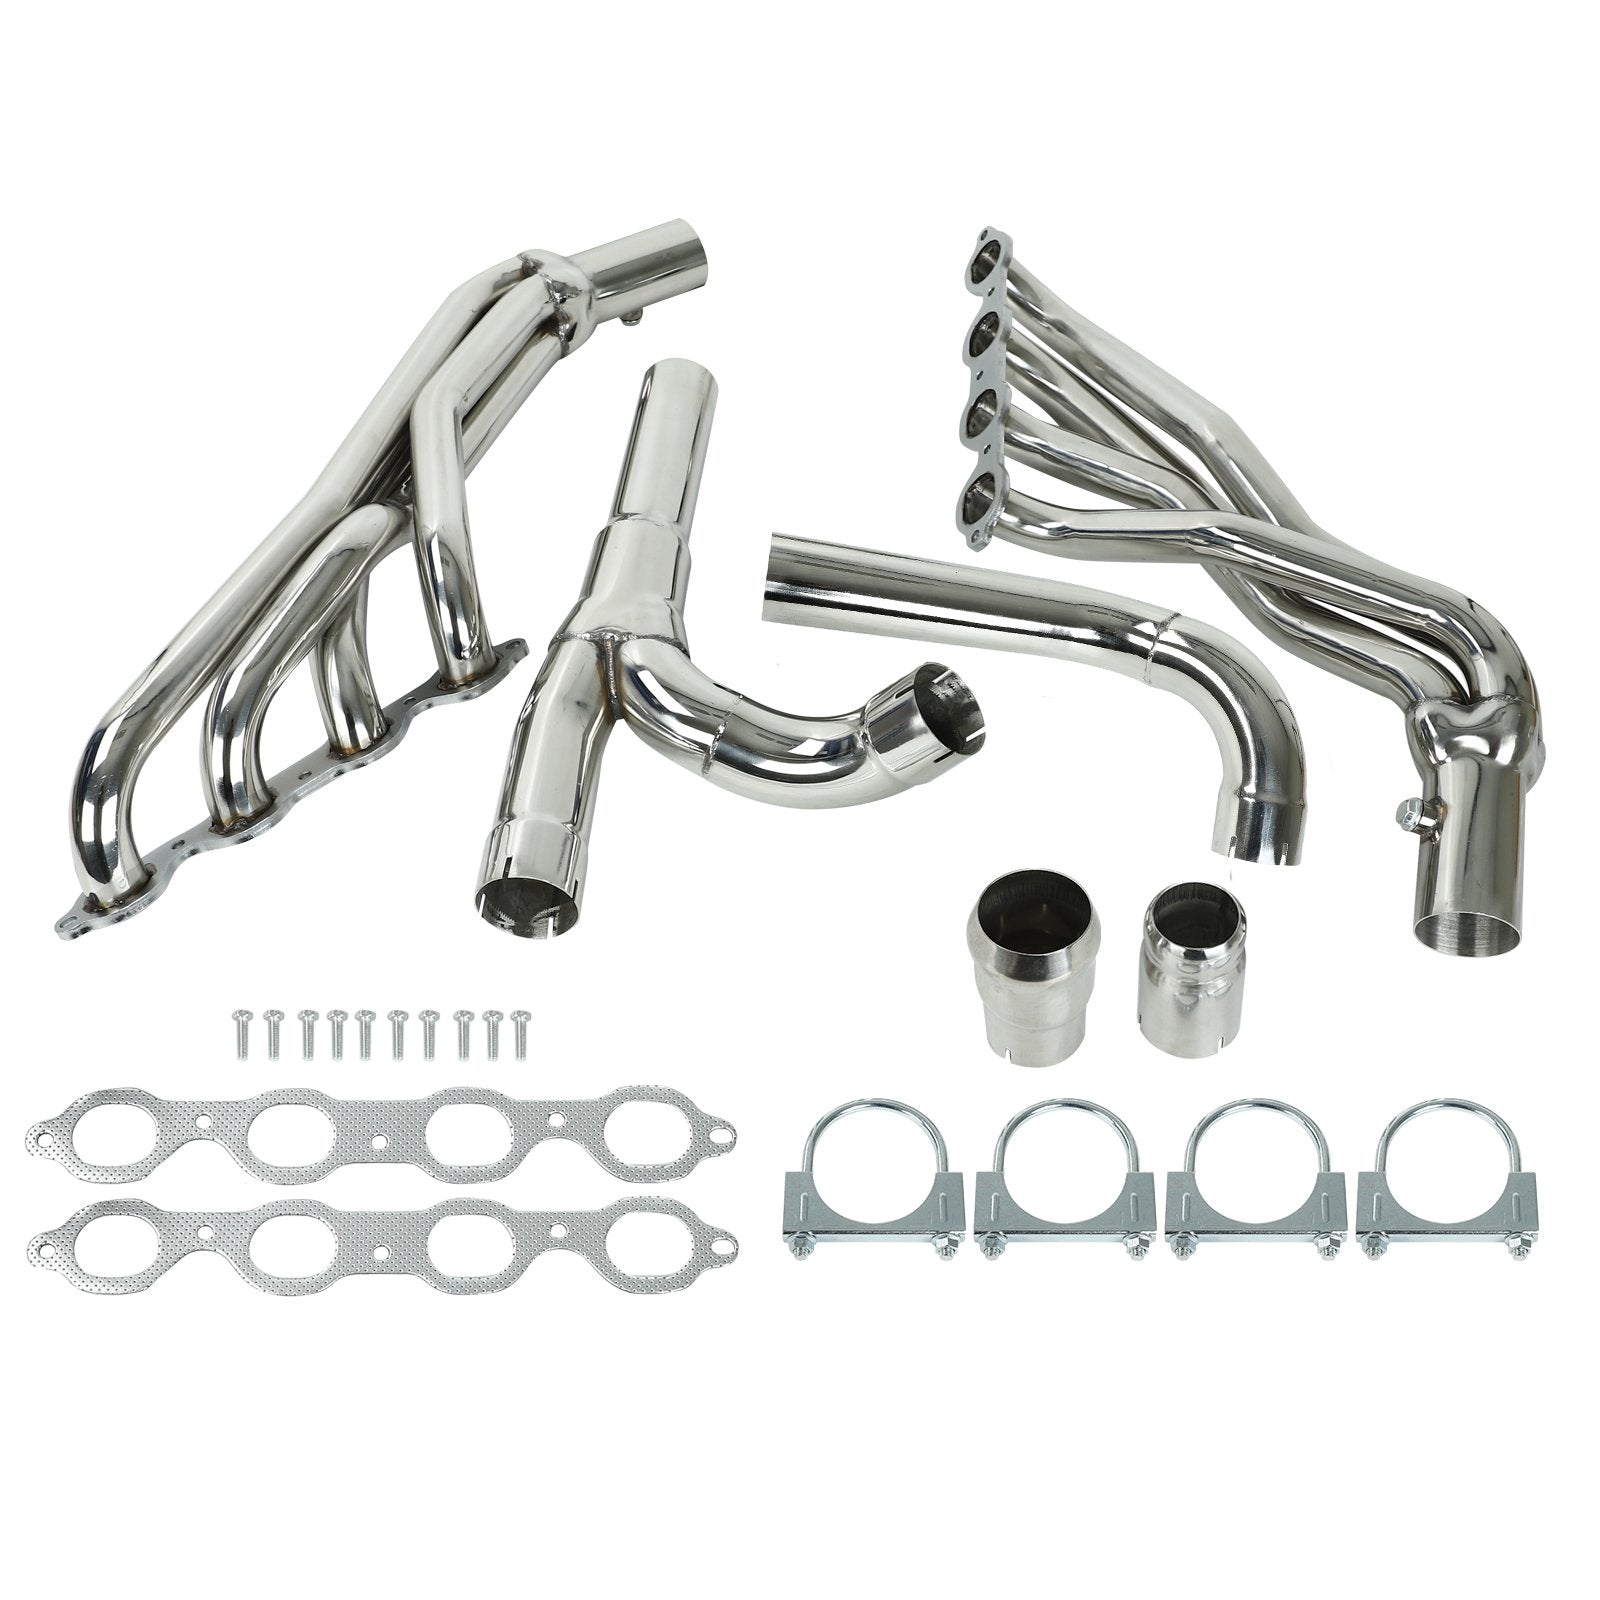 Cadillac 2015-2017 Escalade 2WD/4WD 5.3L 6.2L Stainless Exhaust Header